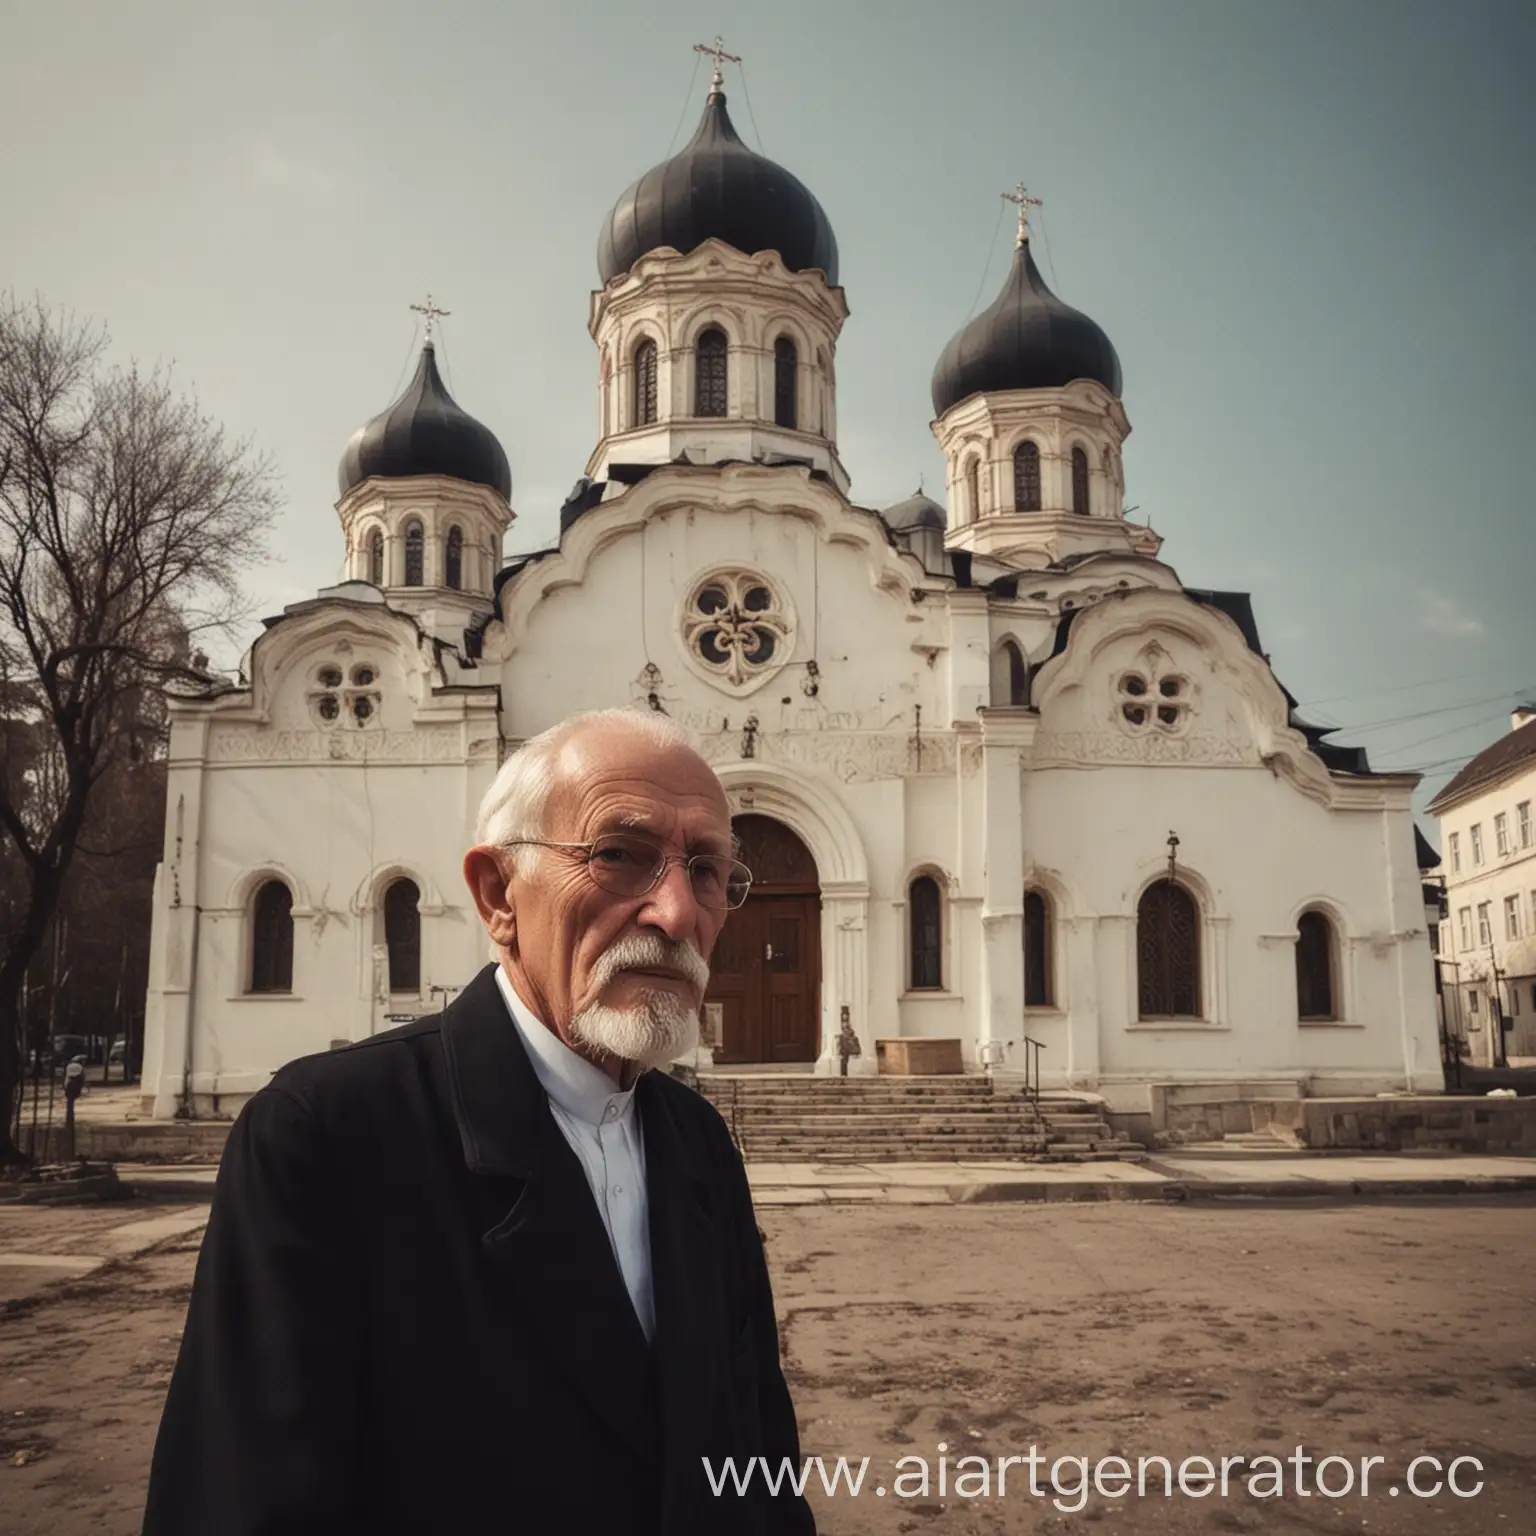 Elderly-Man-Standing-Proudly-before-an-Ornate-Orthodox-Church